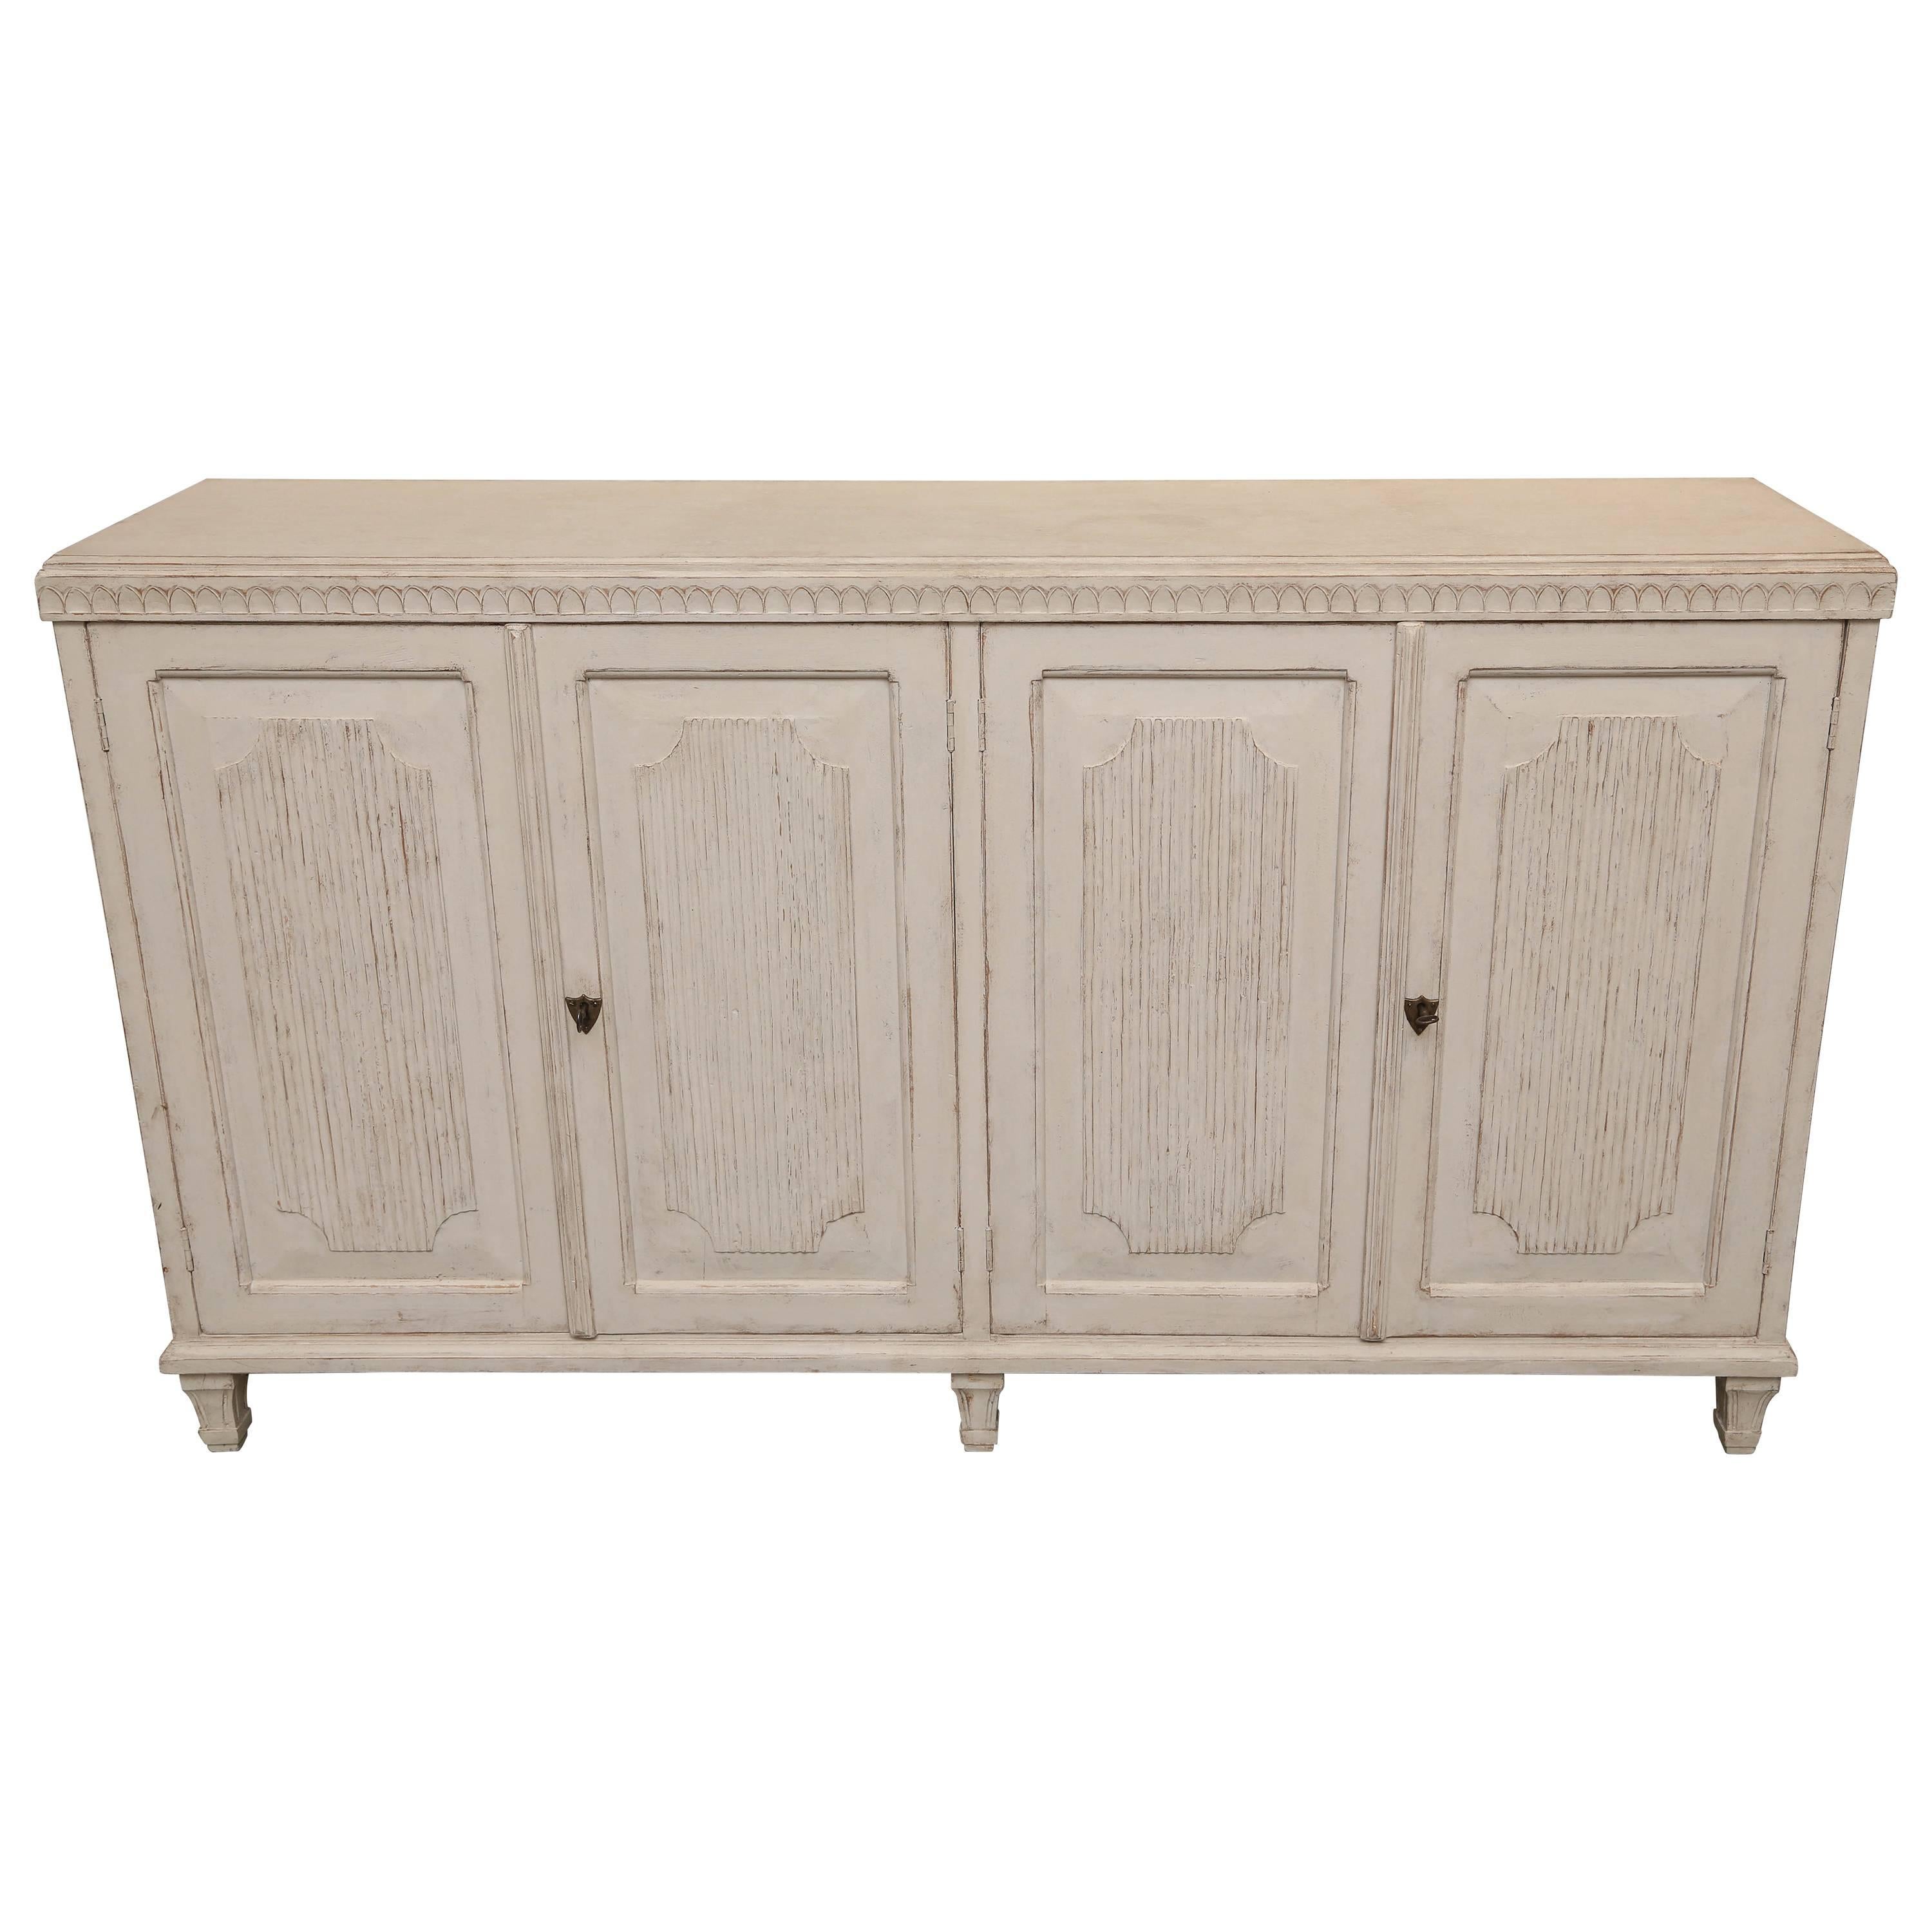 Antique Swedish Gustavian Painted Sideboard with Four Raised Panel Doors